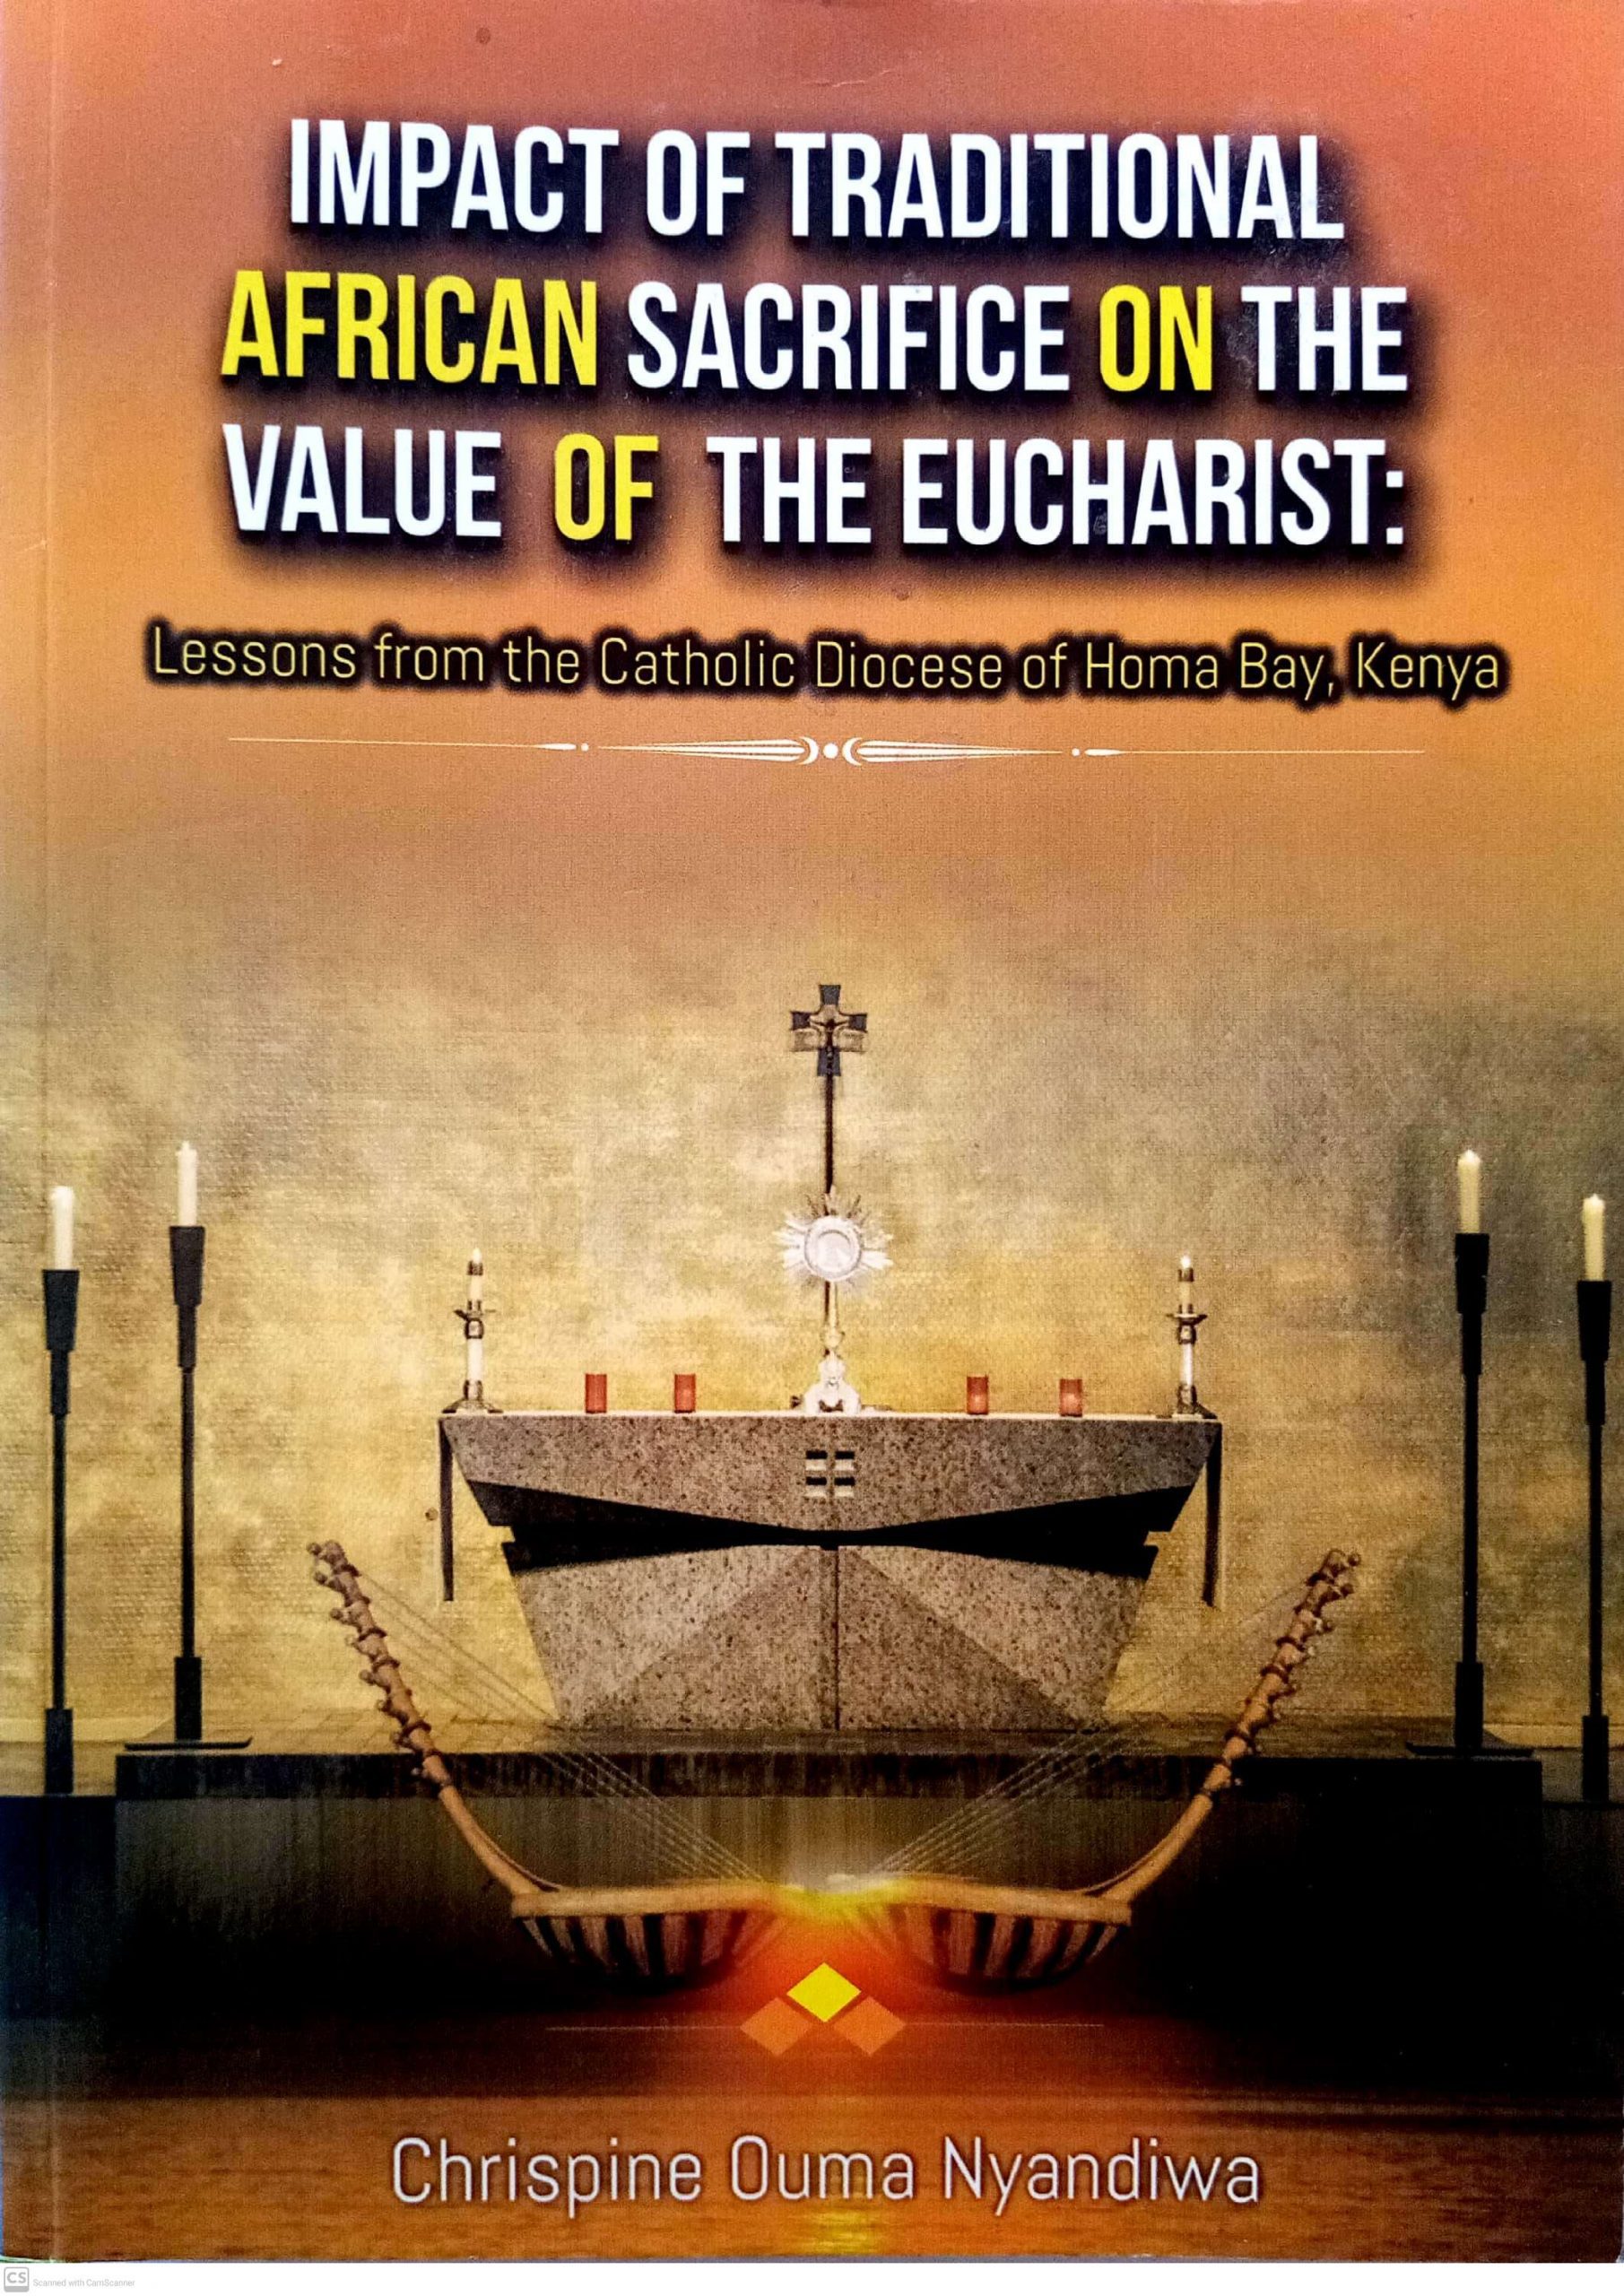 IMPACT OF TRADITIONAL AFRICAN SACRIFICE ON THE VALUE OF THE EUCHARIST_1